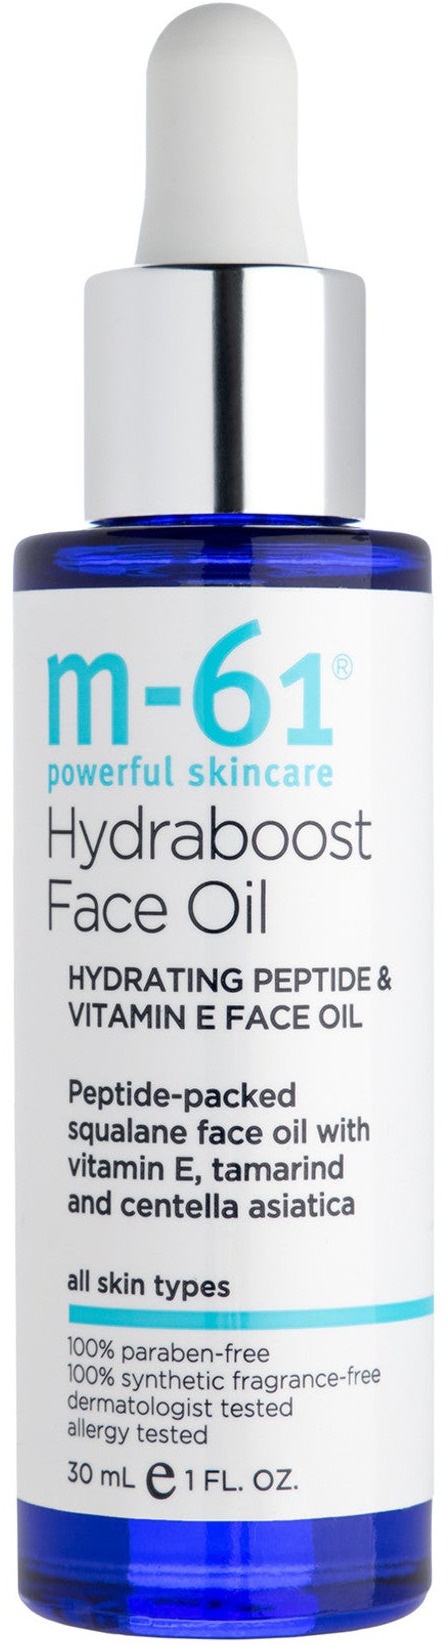 M-61 Hydraboost Face Oil